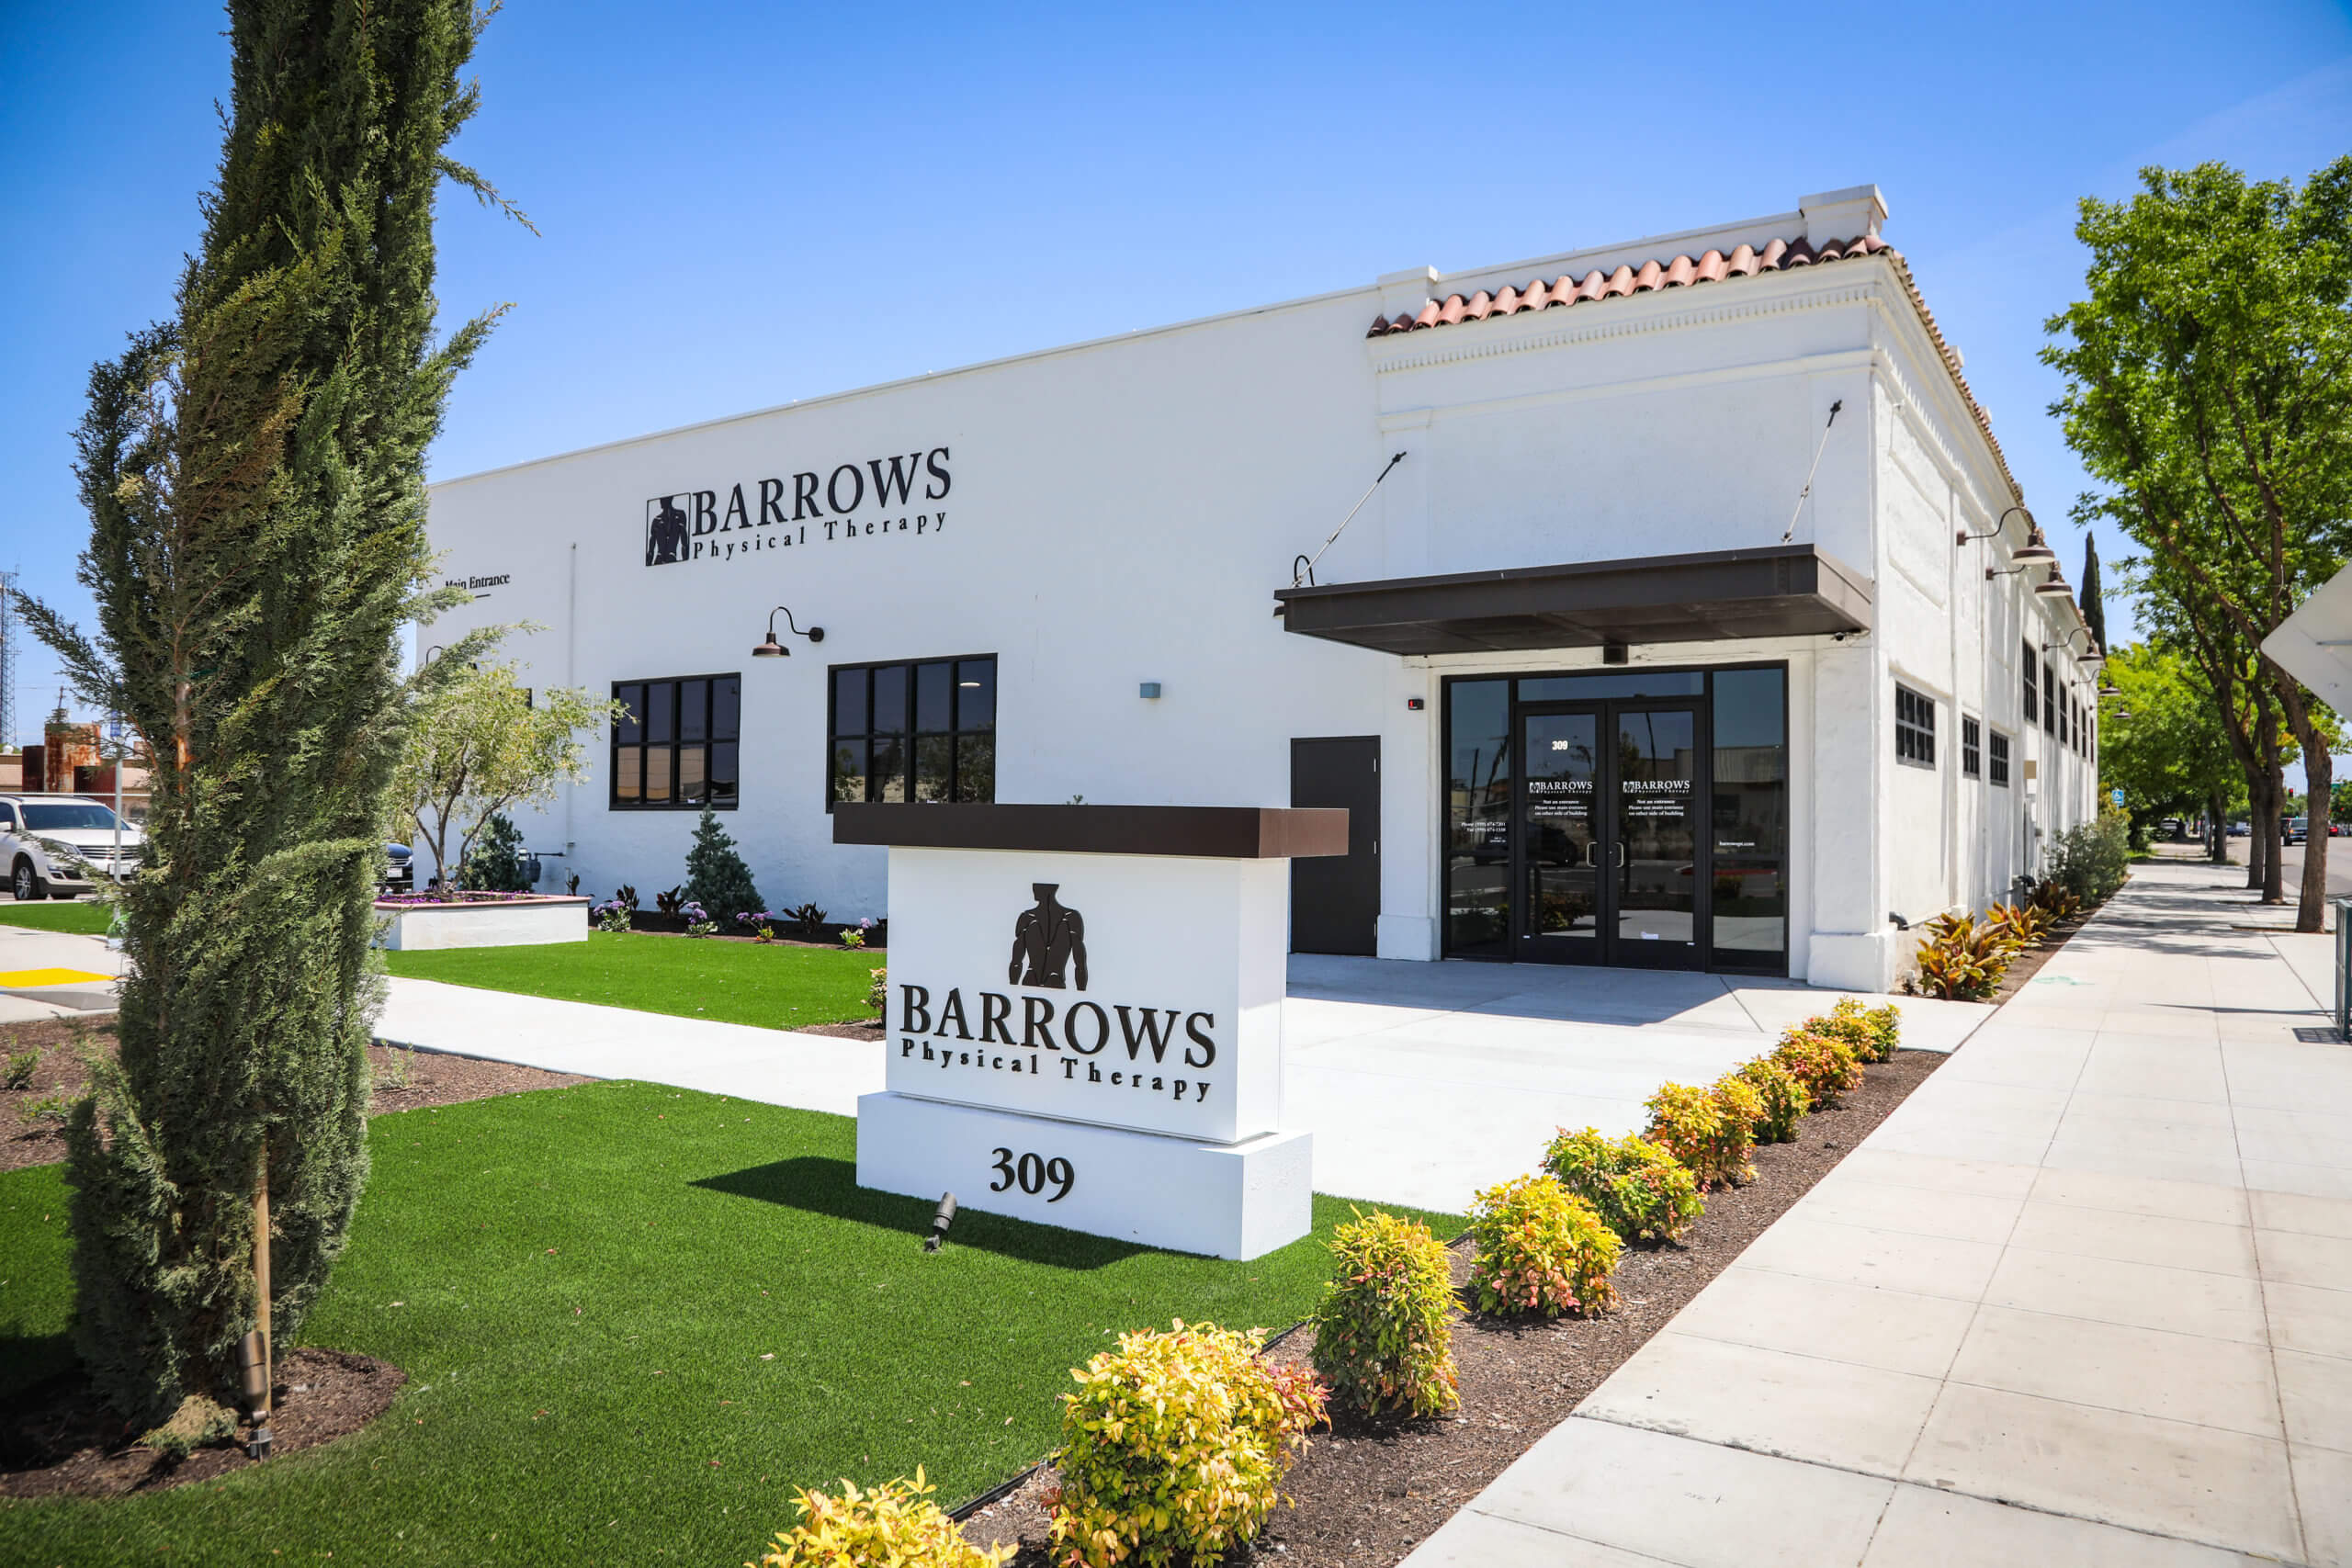 Barrows Physical Therapy - Two Convenient Locations - Fresno & Madera, CA